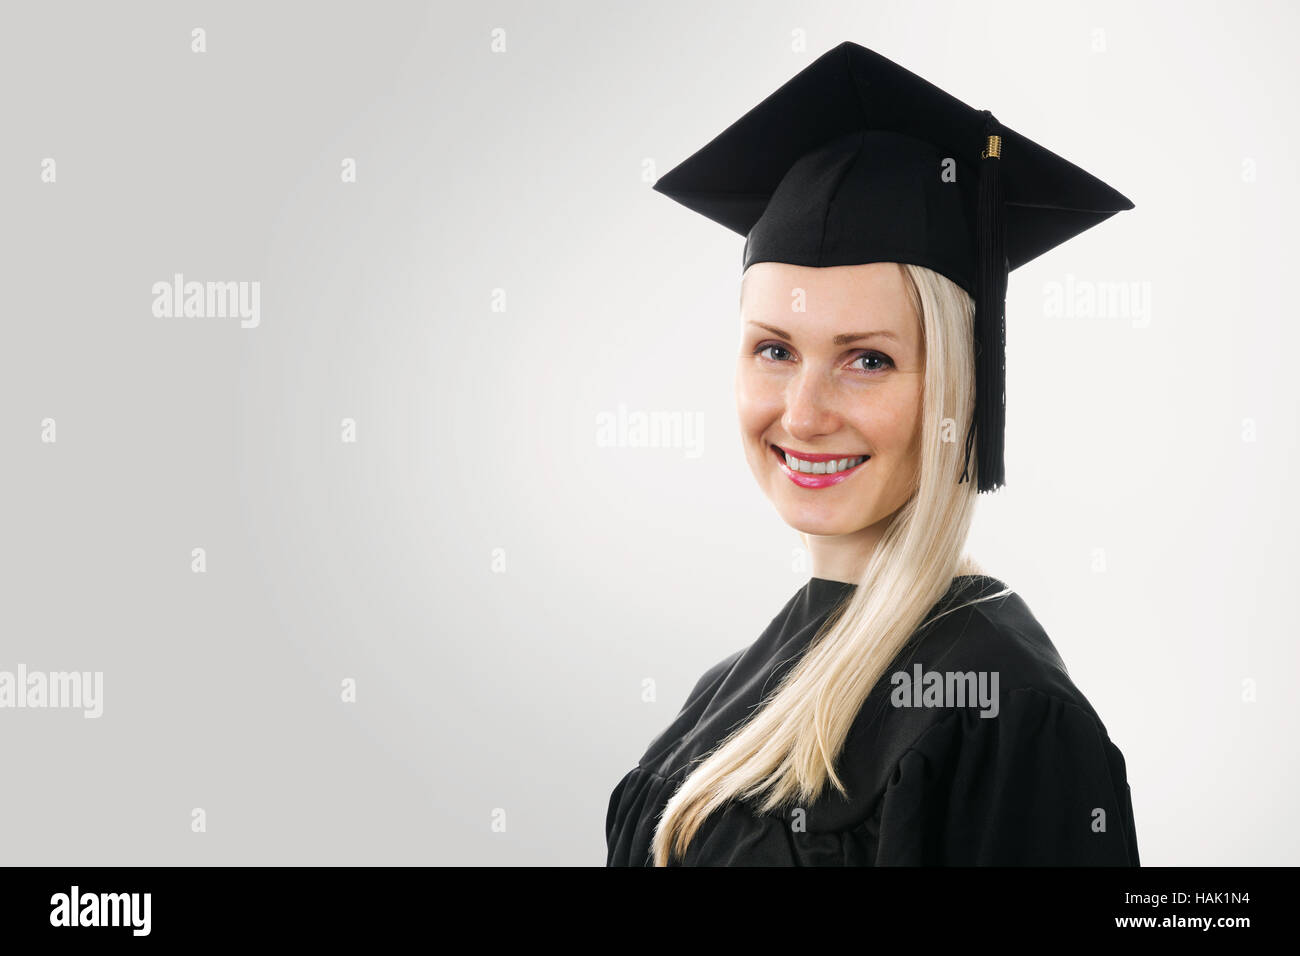 university graduate wearing cap and gown on gray background with copyspace Stock Photo